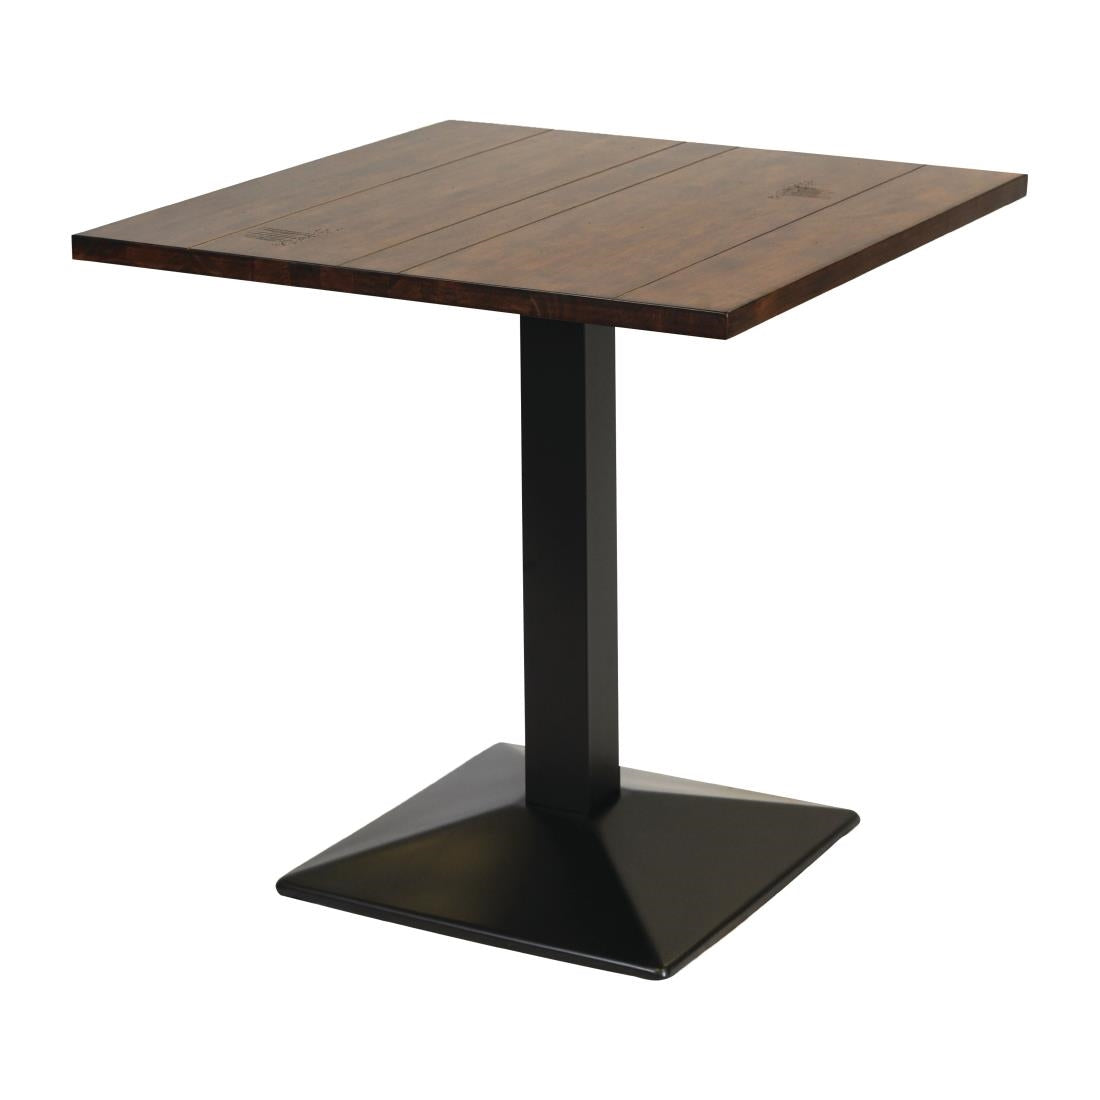 FT512 Turin Metal Base Pedestal Square Table with Vintage Top 760x760mm JD Catering Equipment Solutions Ltd